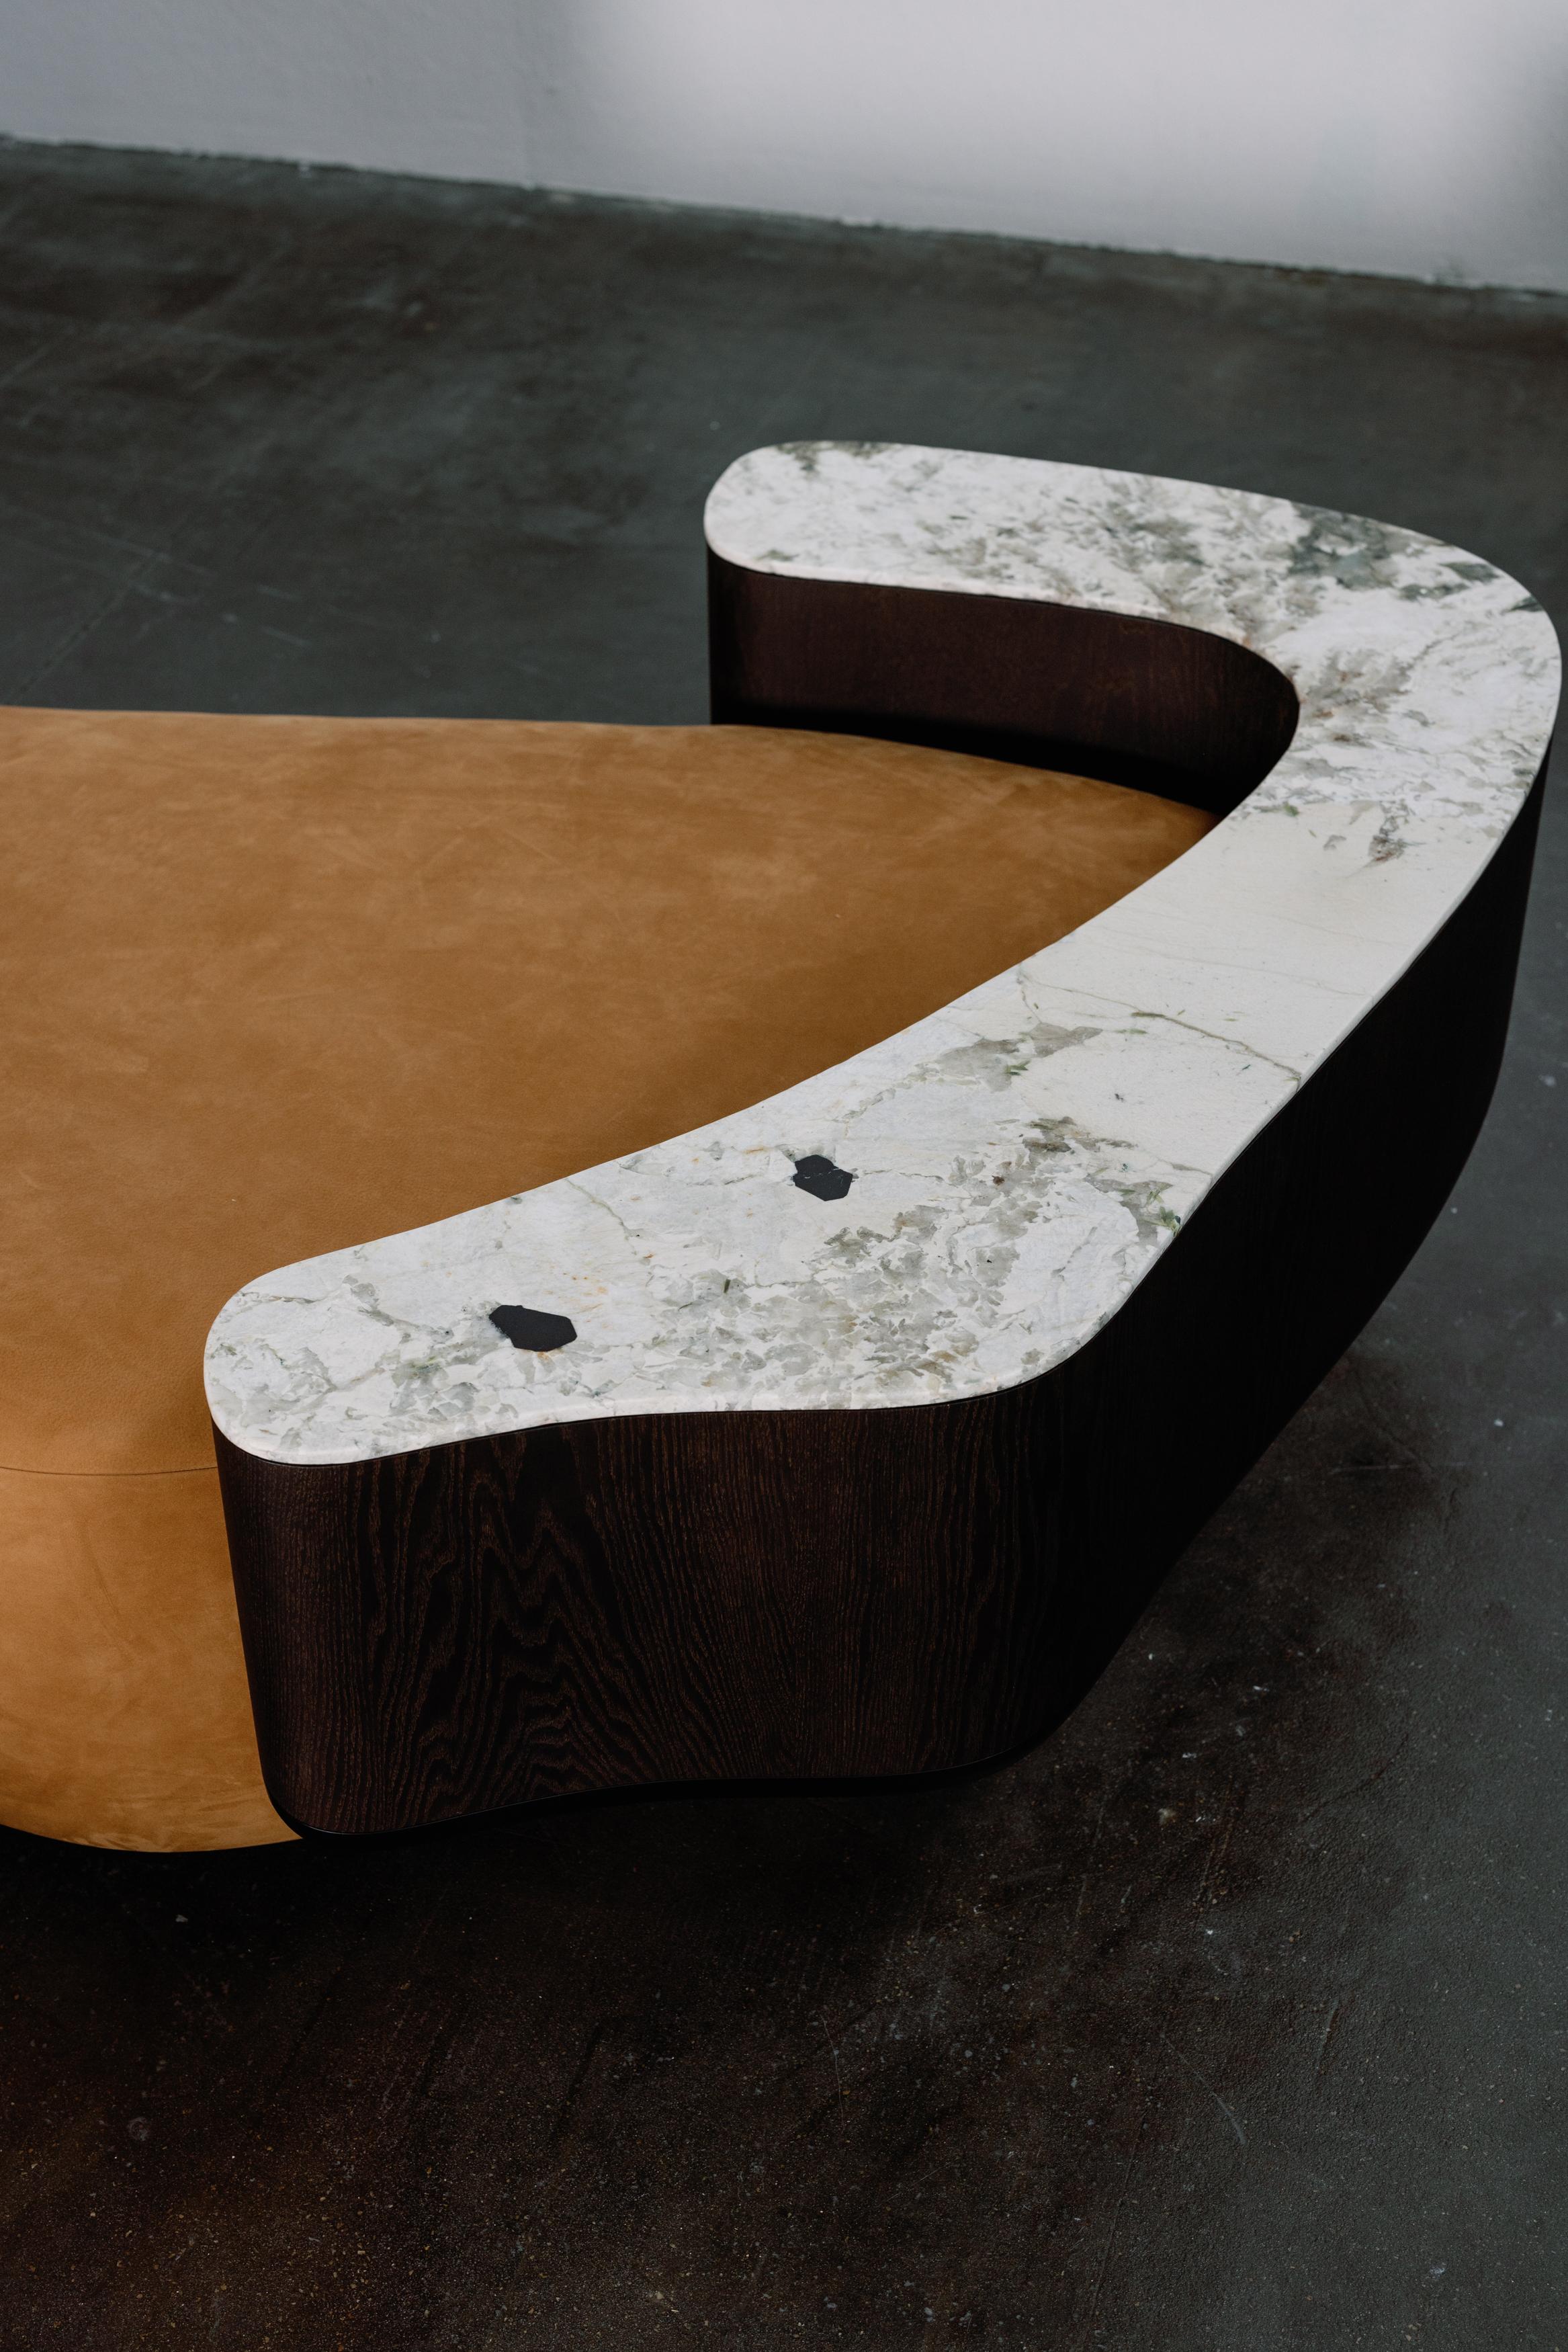 Stained Modern Galapinhos Sofa, Caramel Leather, Handmade in Portugal by Greenapple For Sale